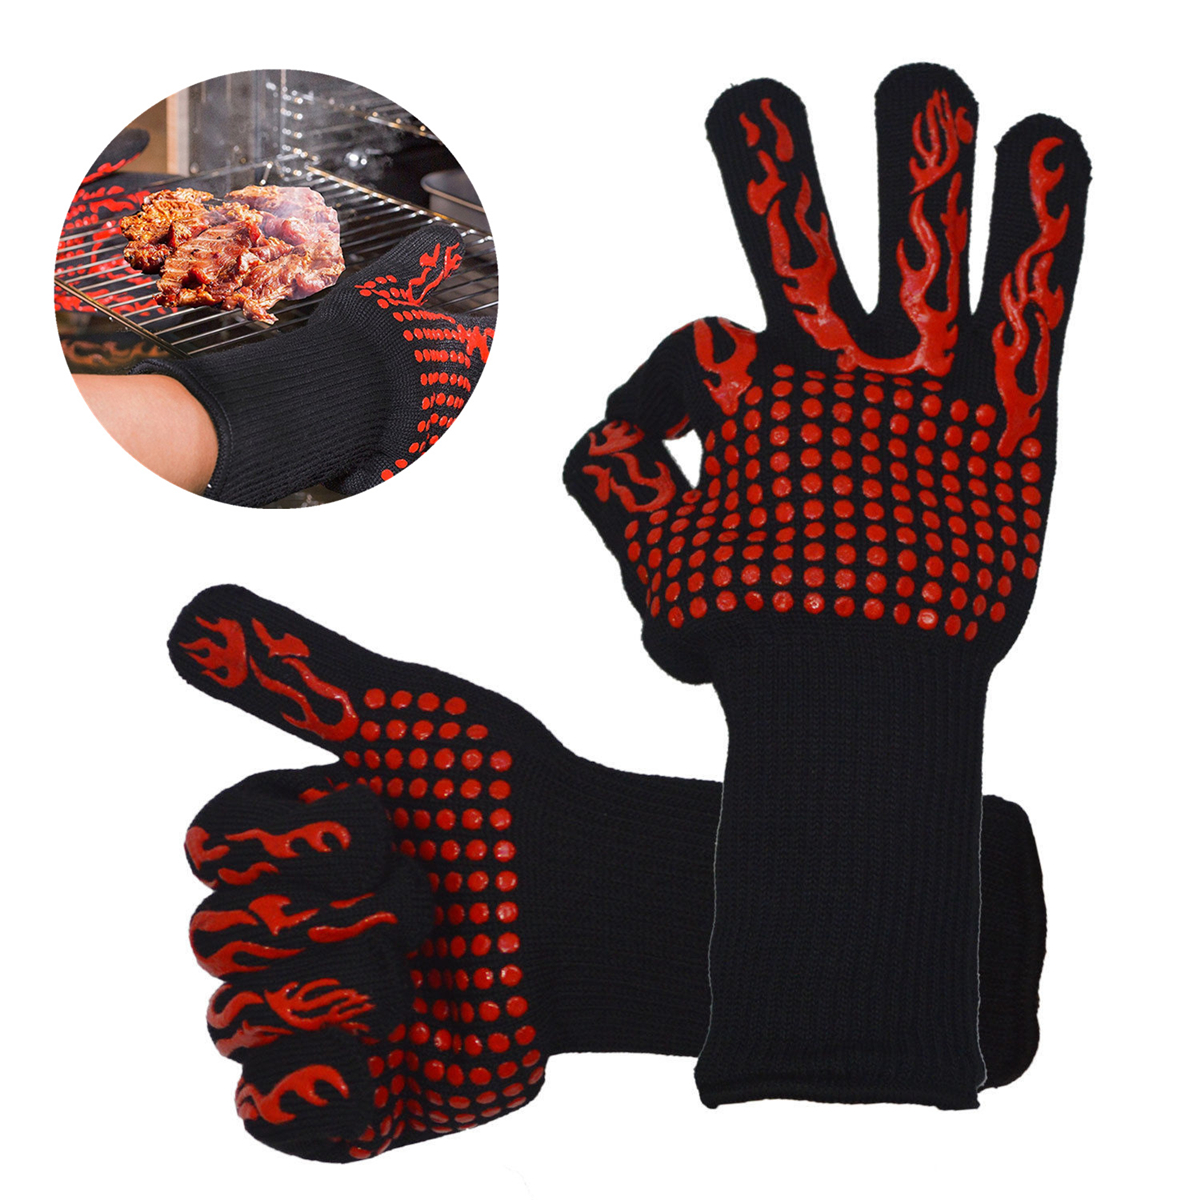 

Silicone Extreme Heat-insulated Cooking Glove Oven Hot BBQ Grilling Heating Proof Mitt